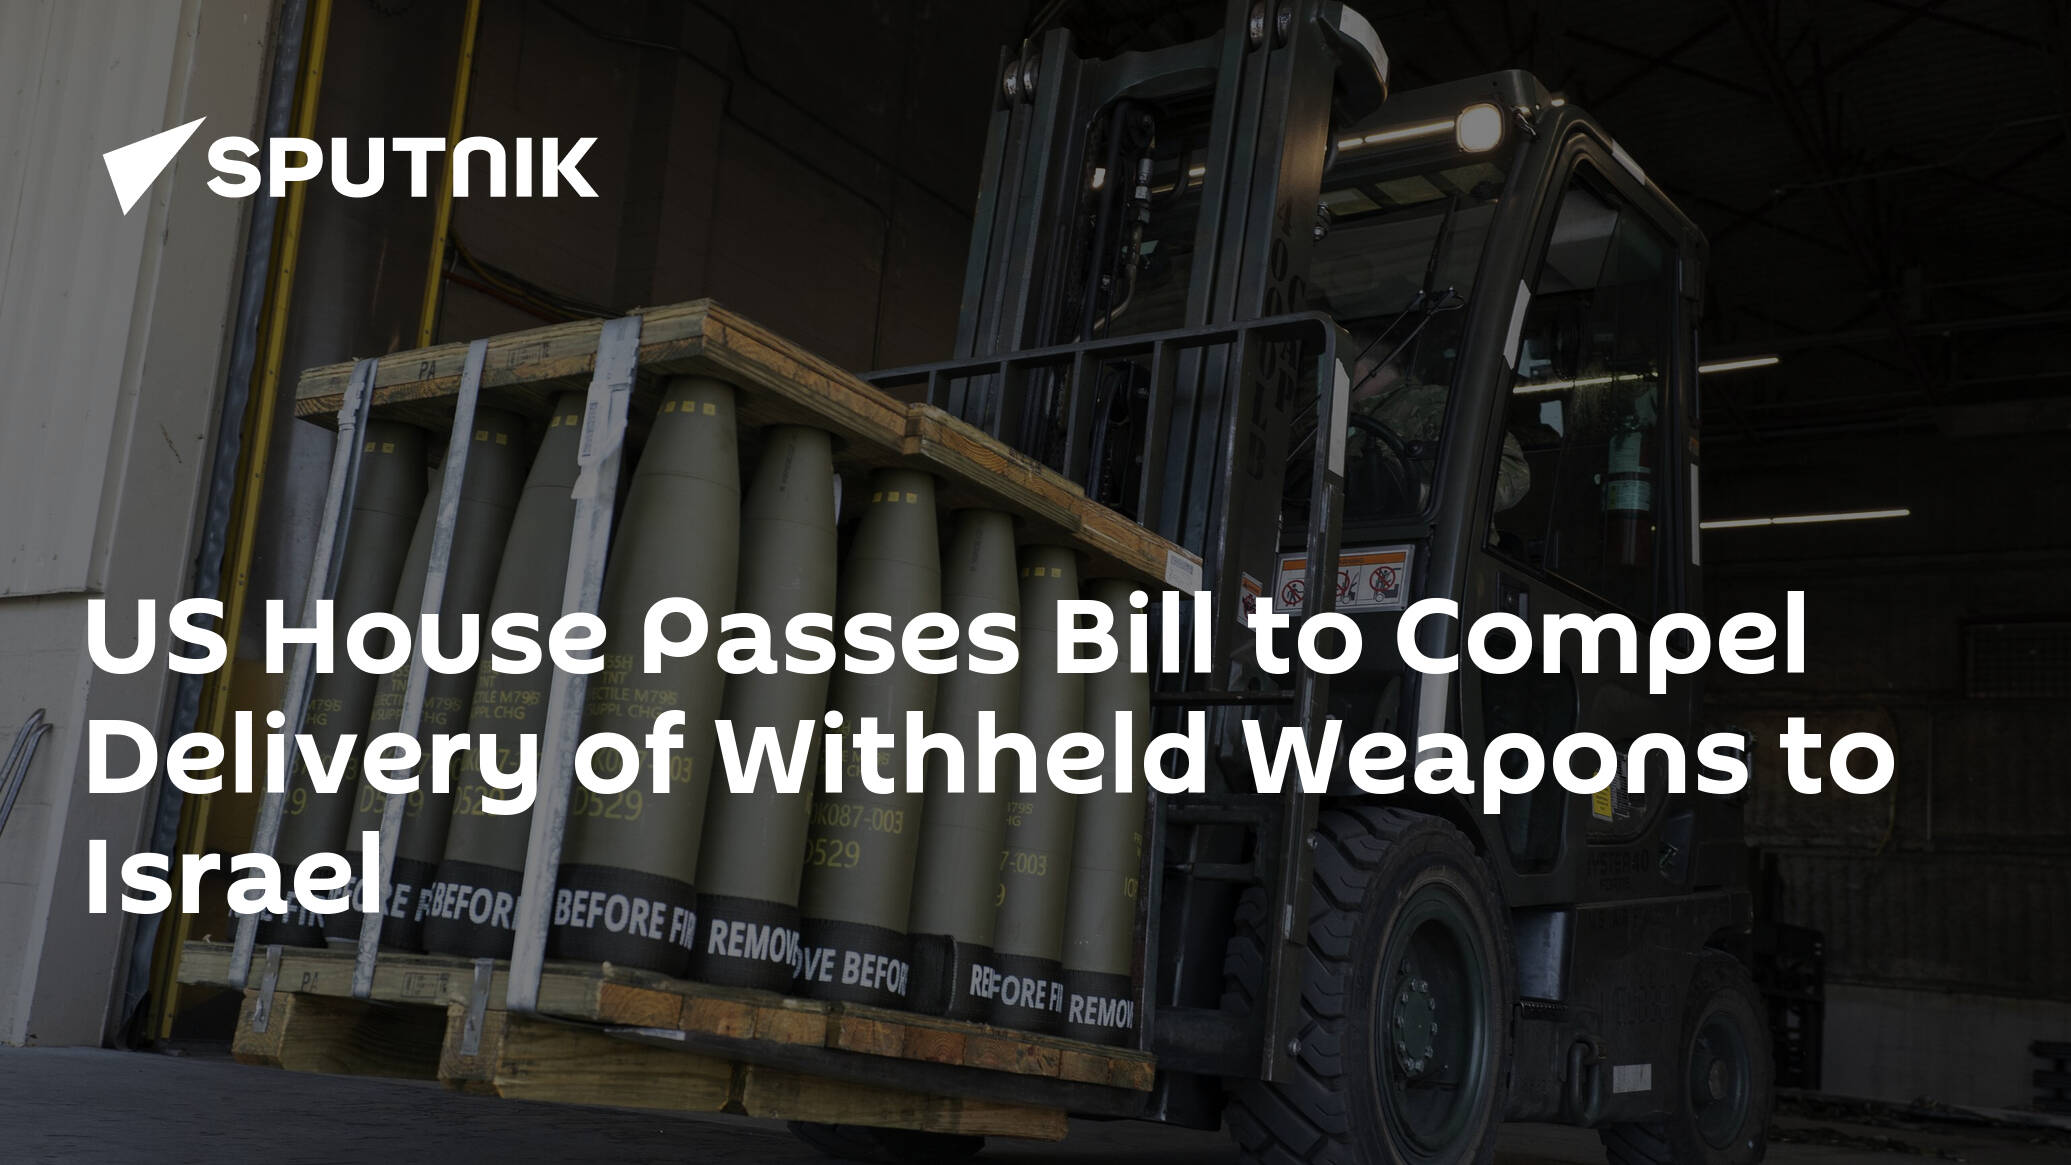 US House Passes Bill to Compel Delivery of Withheld Weapons to Israel